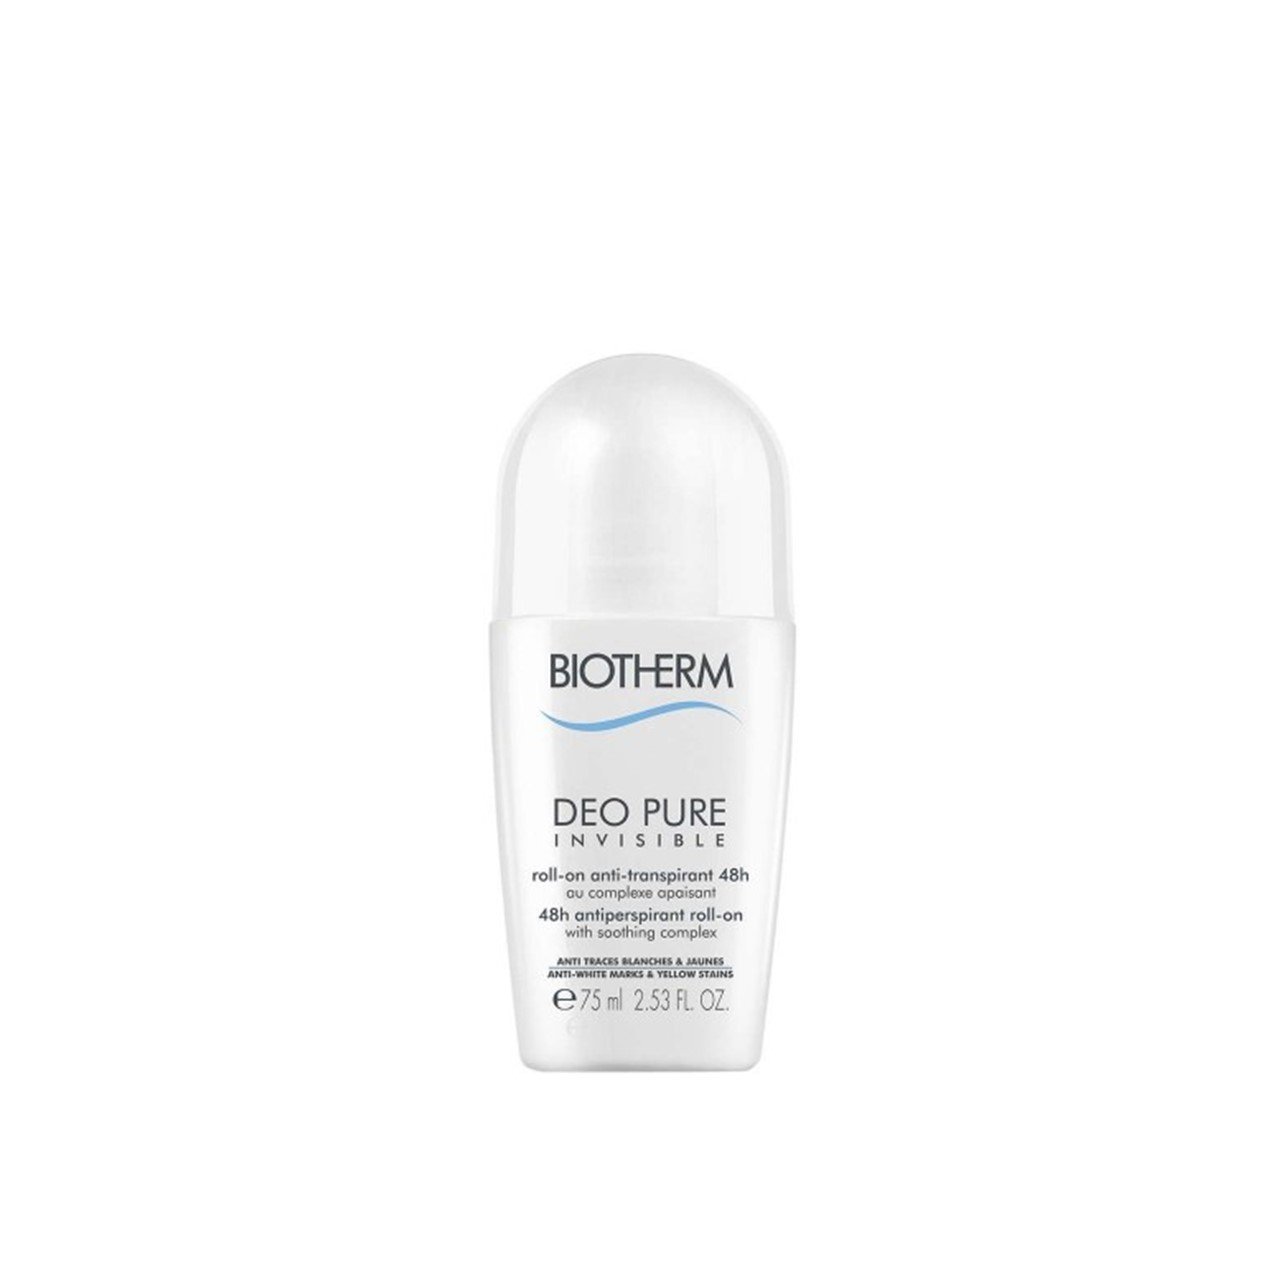 Buy Biotherm Deo Pure Invisible 48h Antiperspirant Roll-On 75ml (2.54fl ·